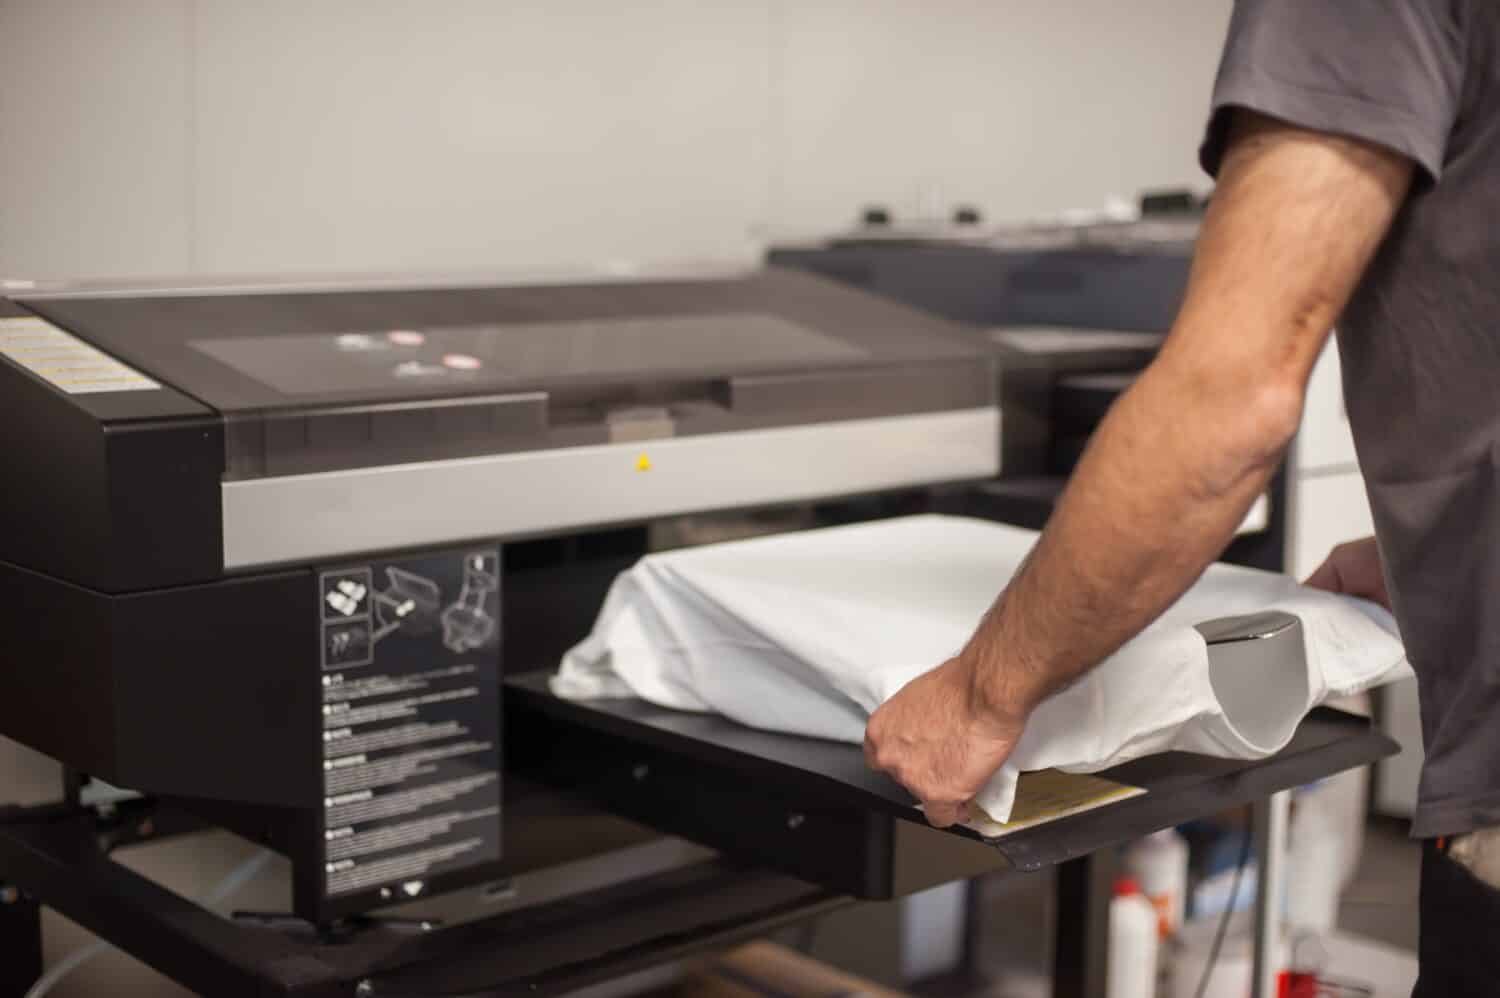 Printers for T Shirts  What's the Best Type to Choose? - DTG Printer  Machine